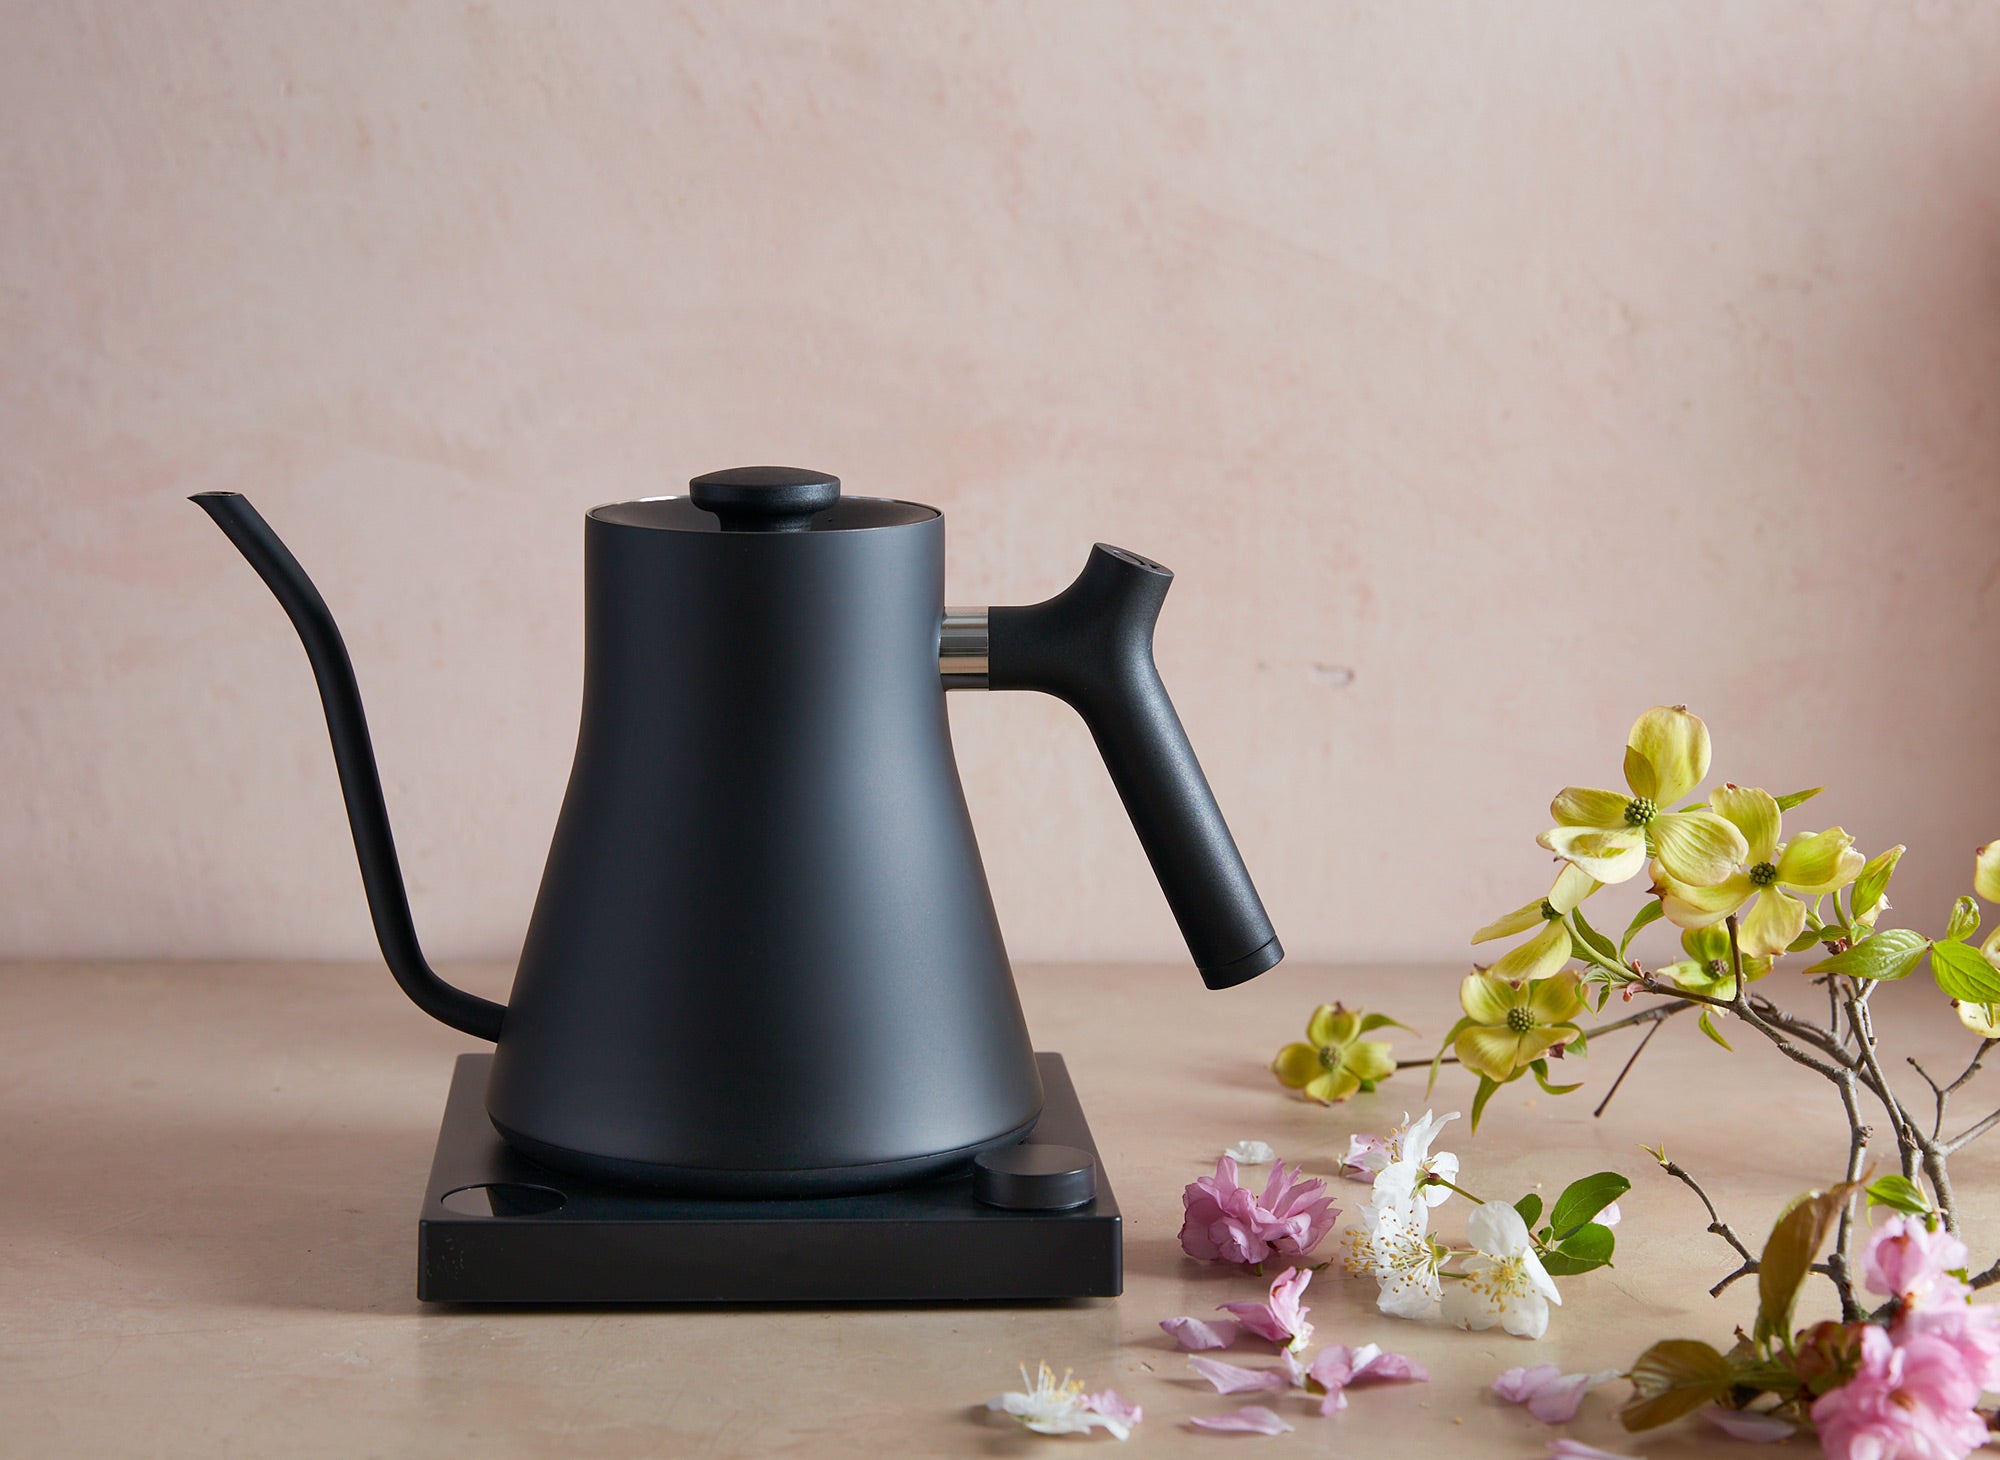 Stagg EKG Pro Electric Kettle - The Brew Company